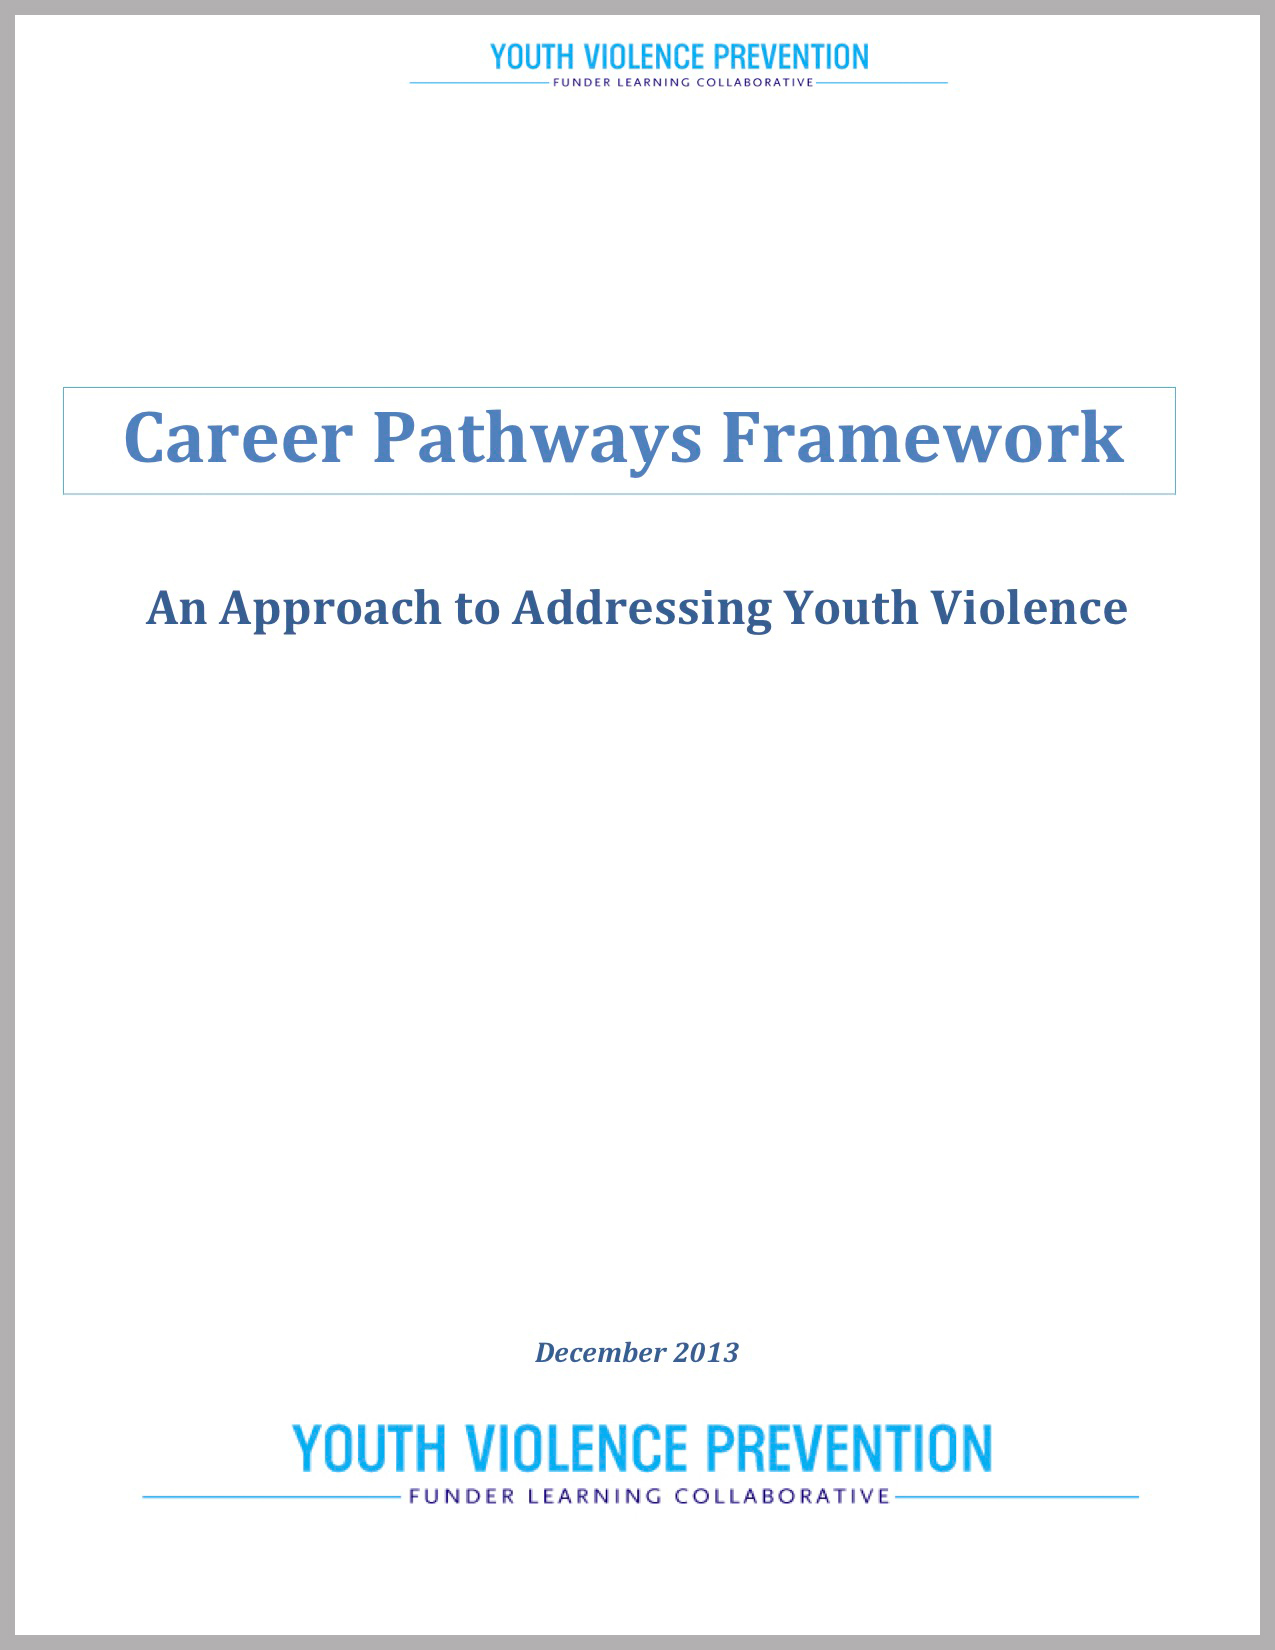 Career Pathways Framework: An Approach to Addressing Youth Violence